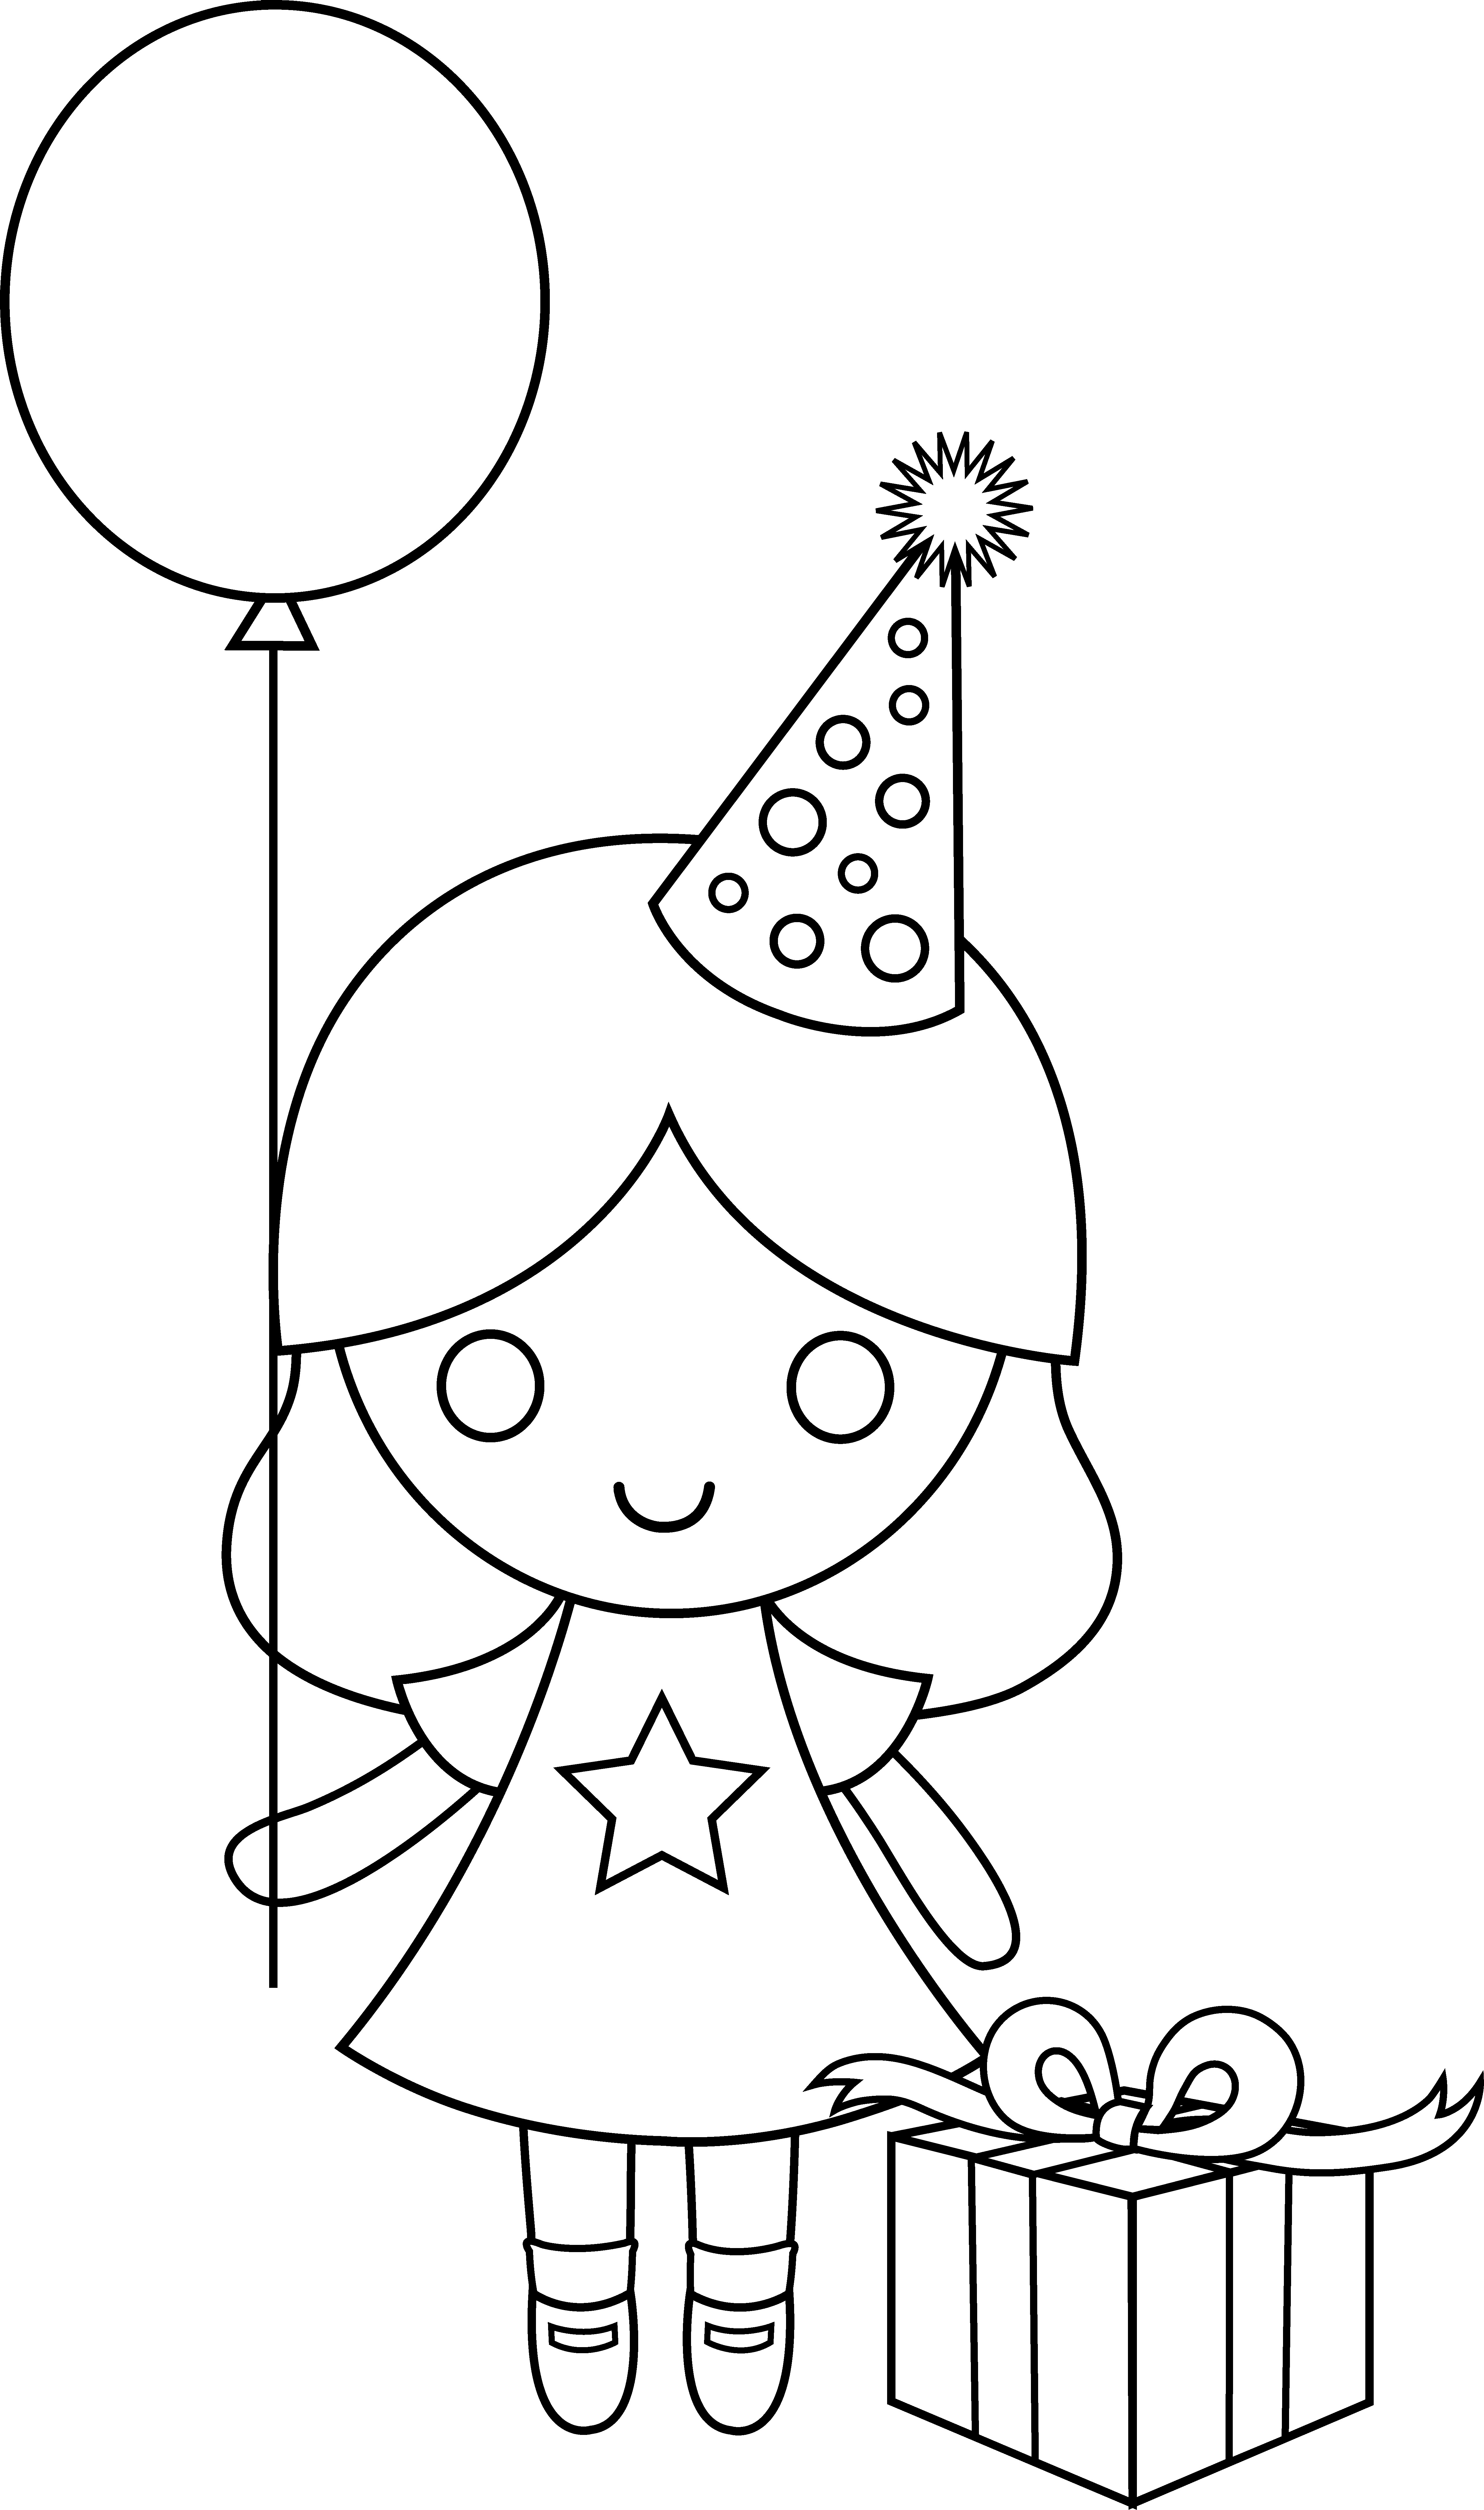 Coloring Sheets For Girls Birtdey
 Birthday Girl Coloring Page Free Clip Art